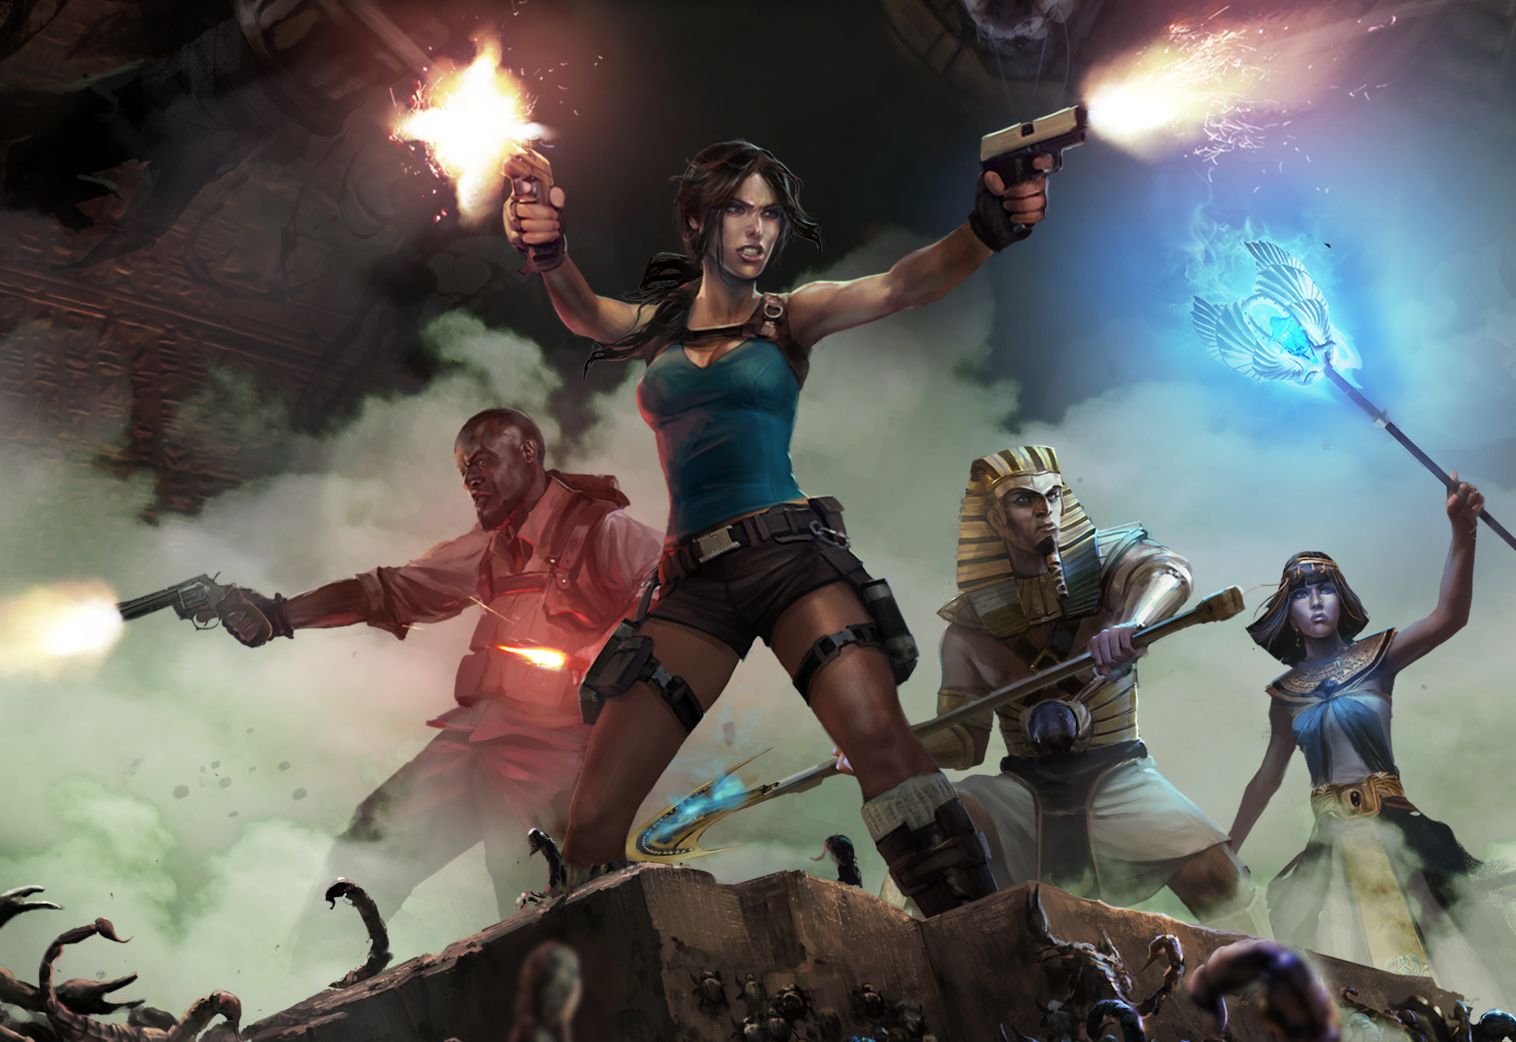 Square Enix Trademarks “Lara Croft: Relic Run” - May Be a Mobile Runner